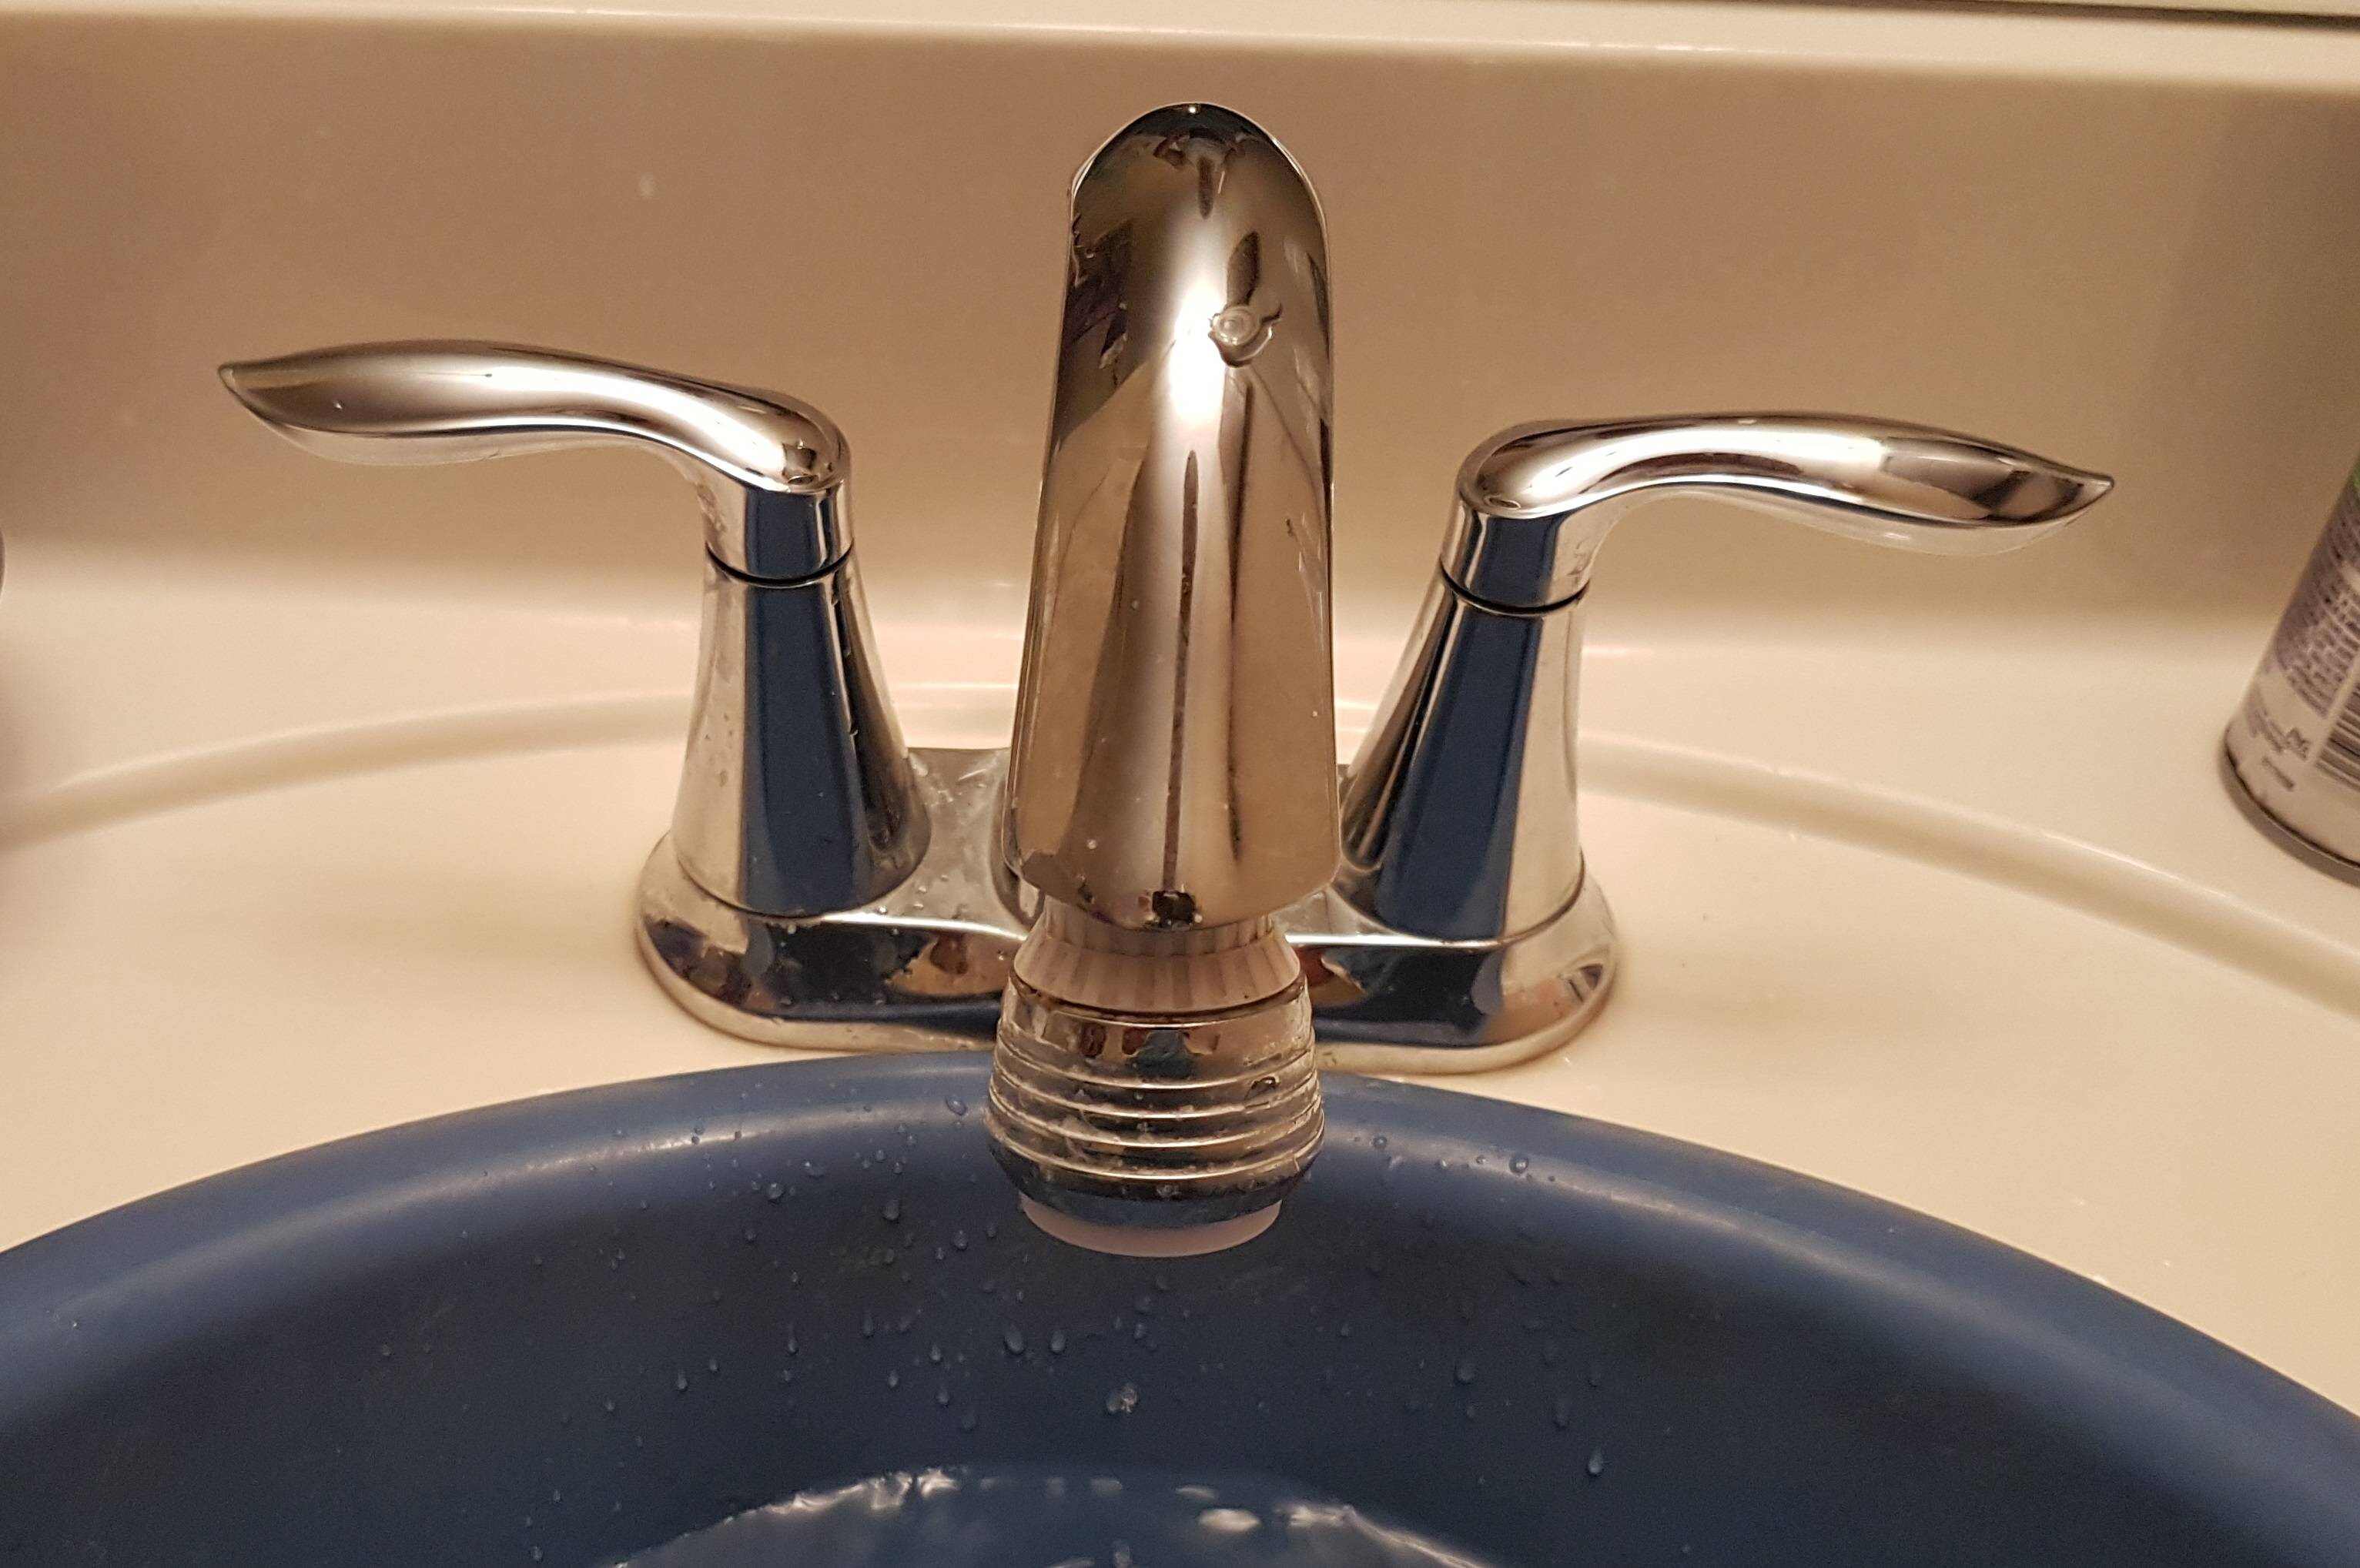 How To Remove Bathroom Faucet Handle